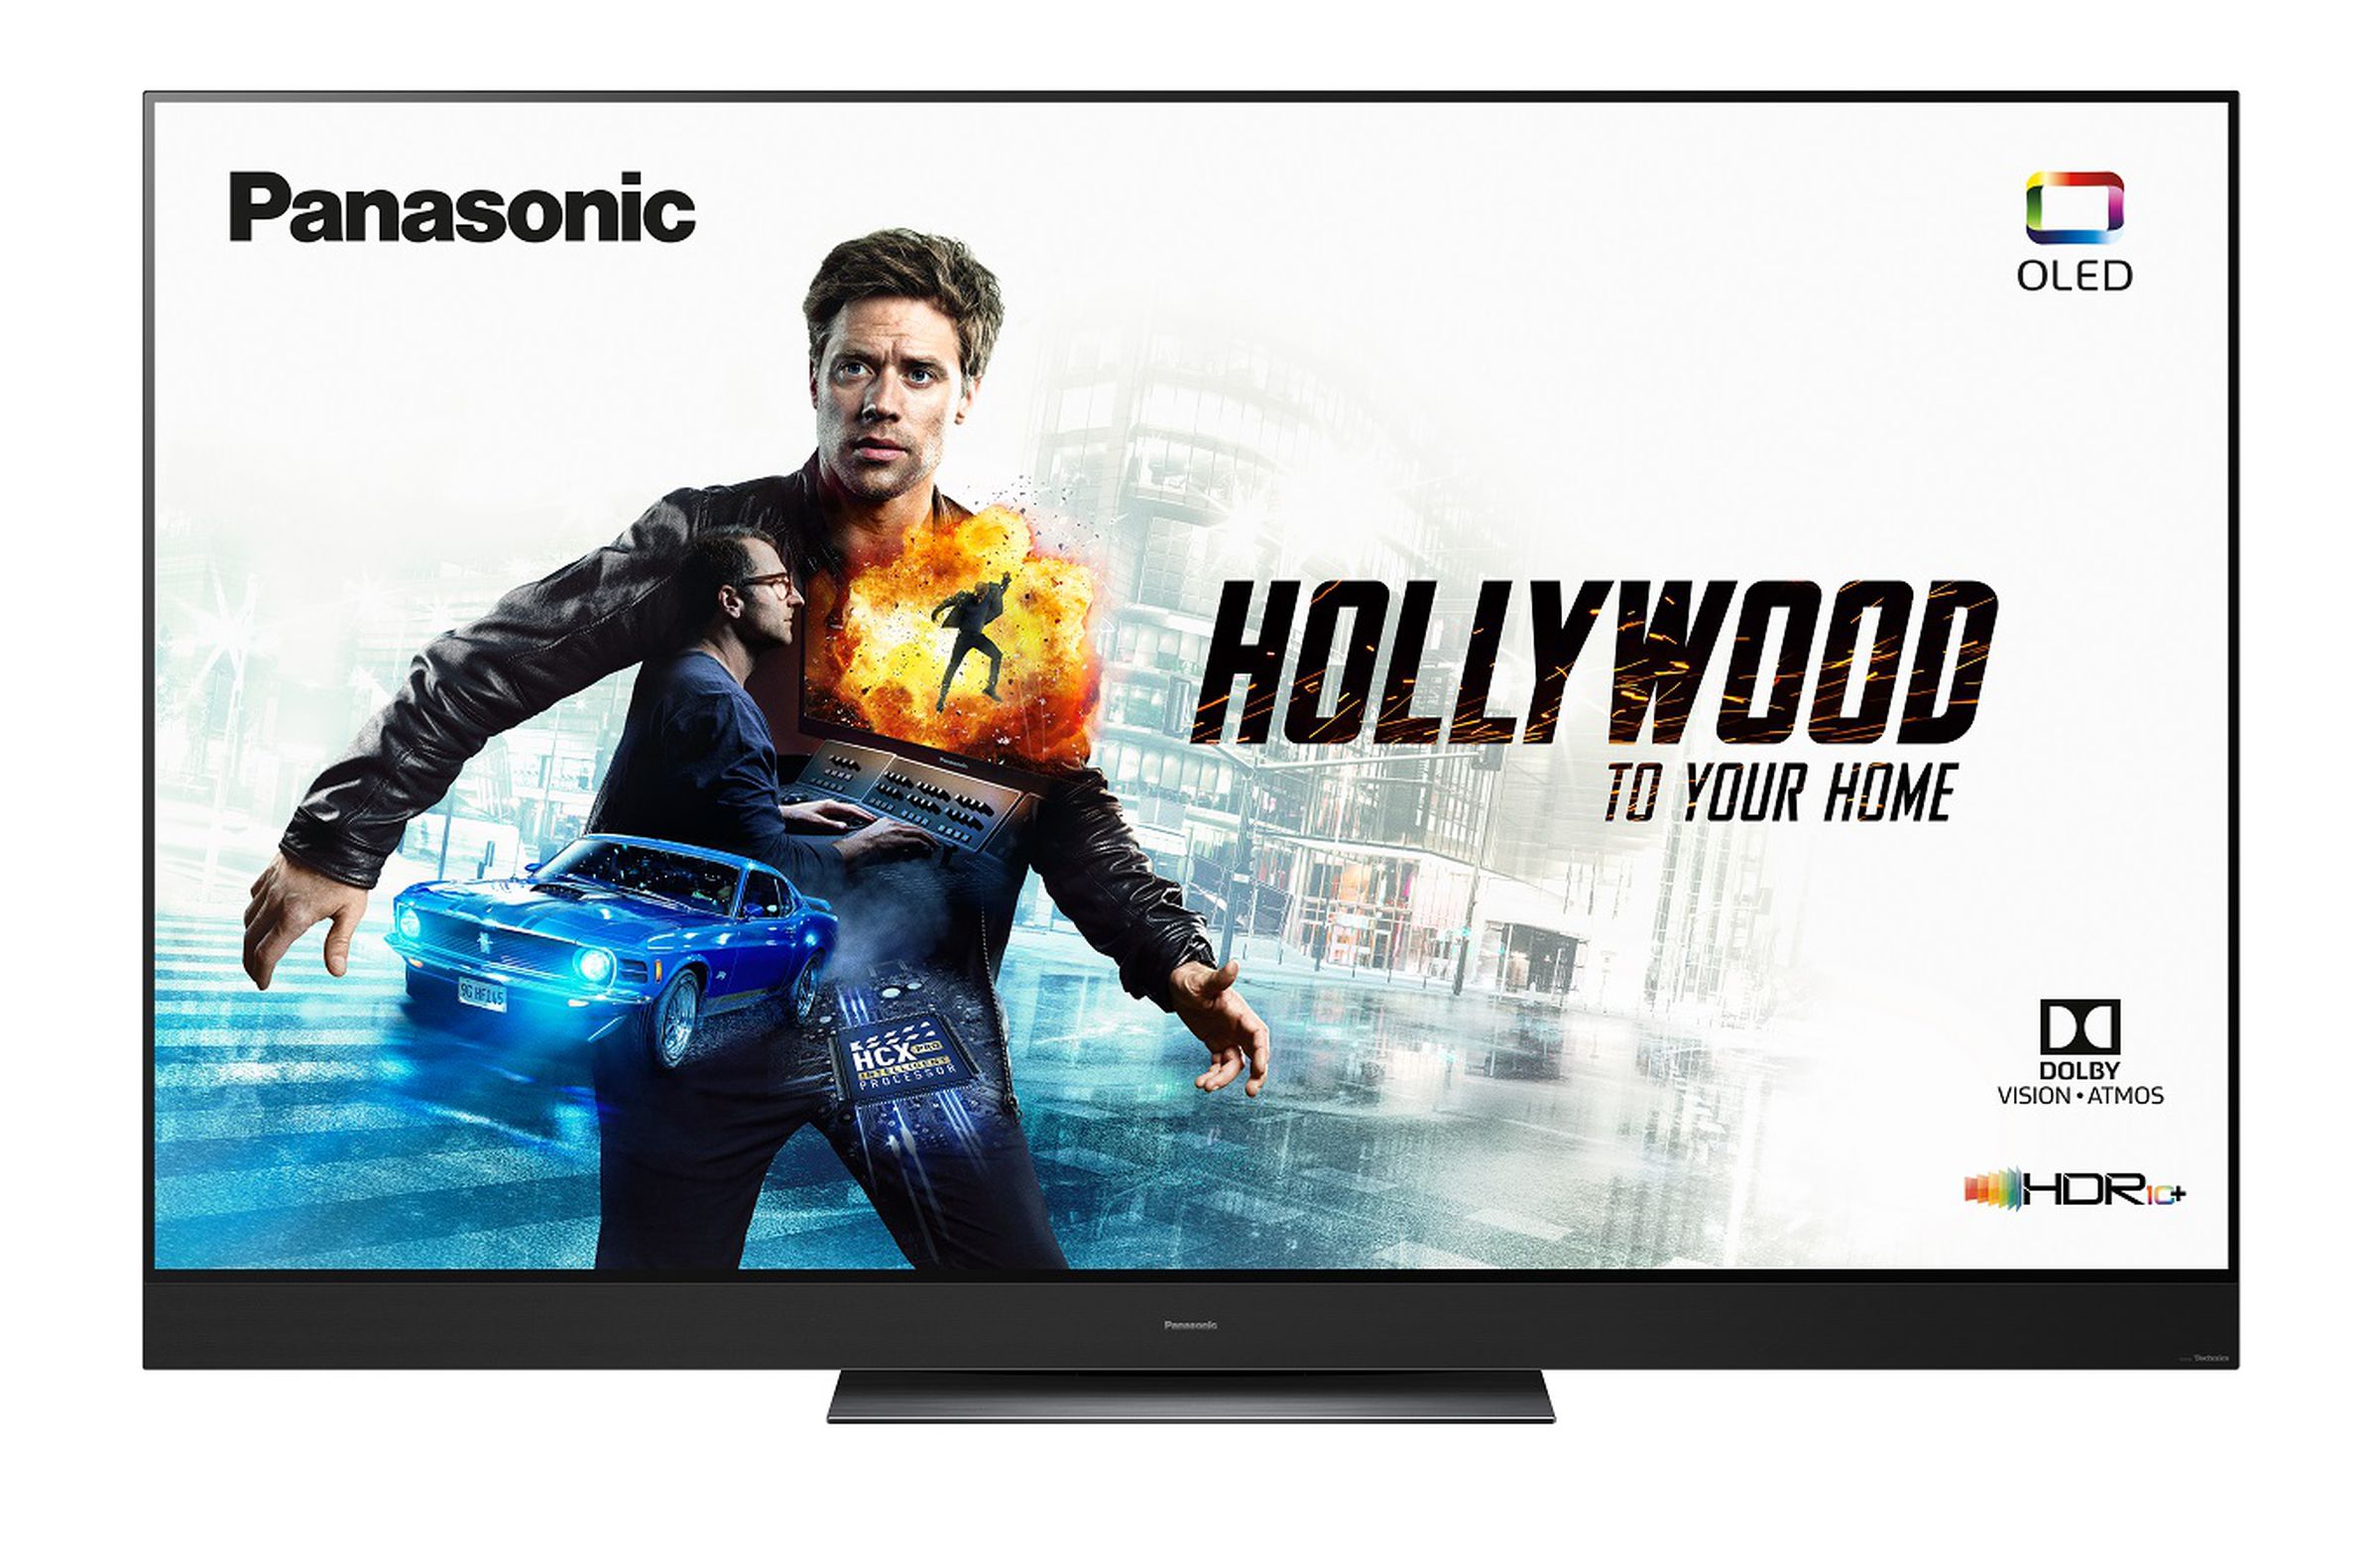 Panasonic’s latest OLED is the first to support both HDR10+ and Dolby Vision.